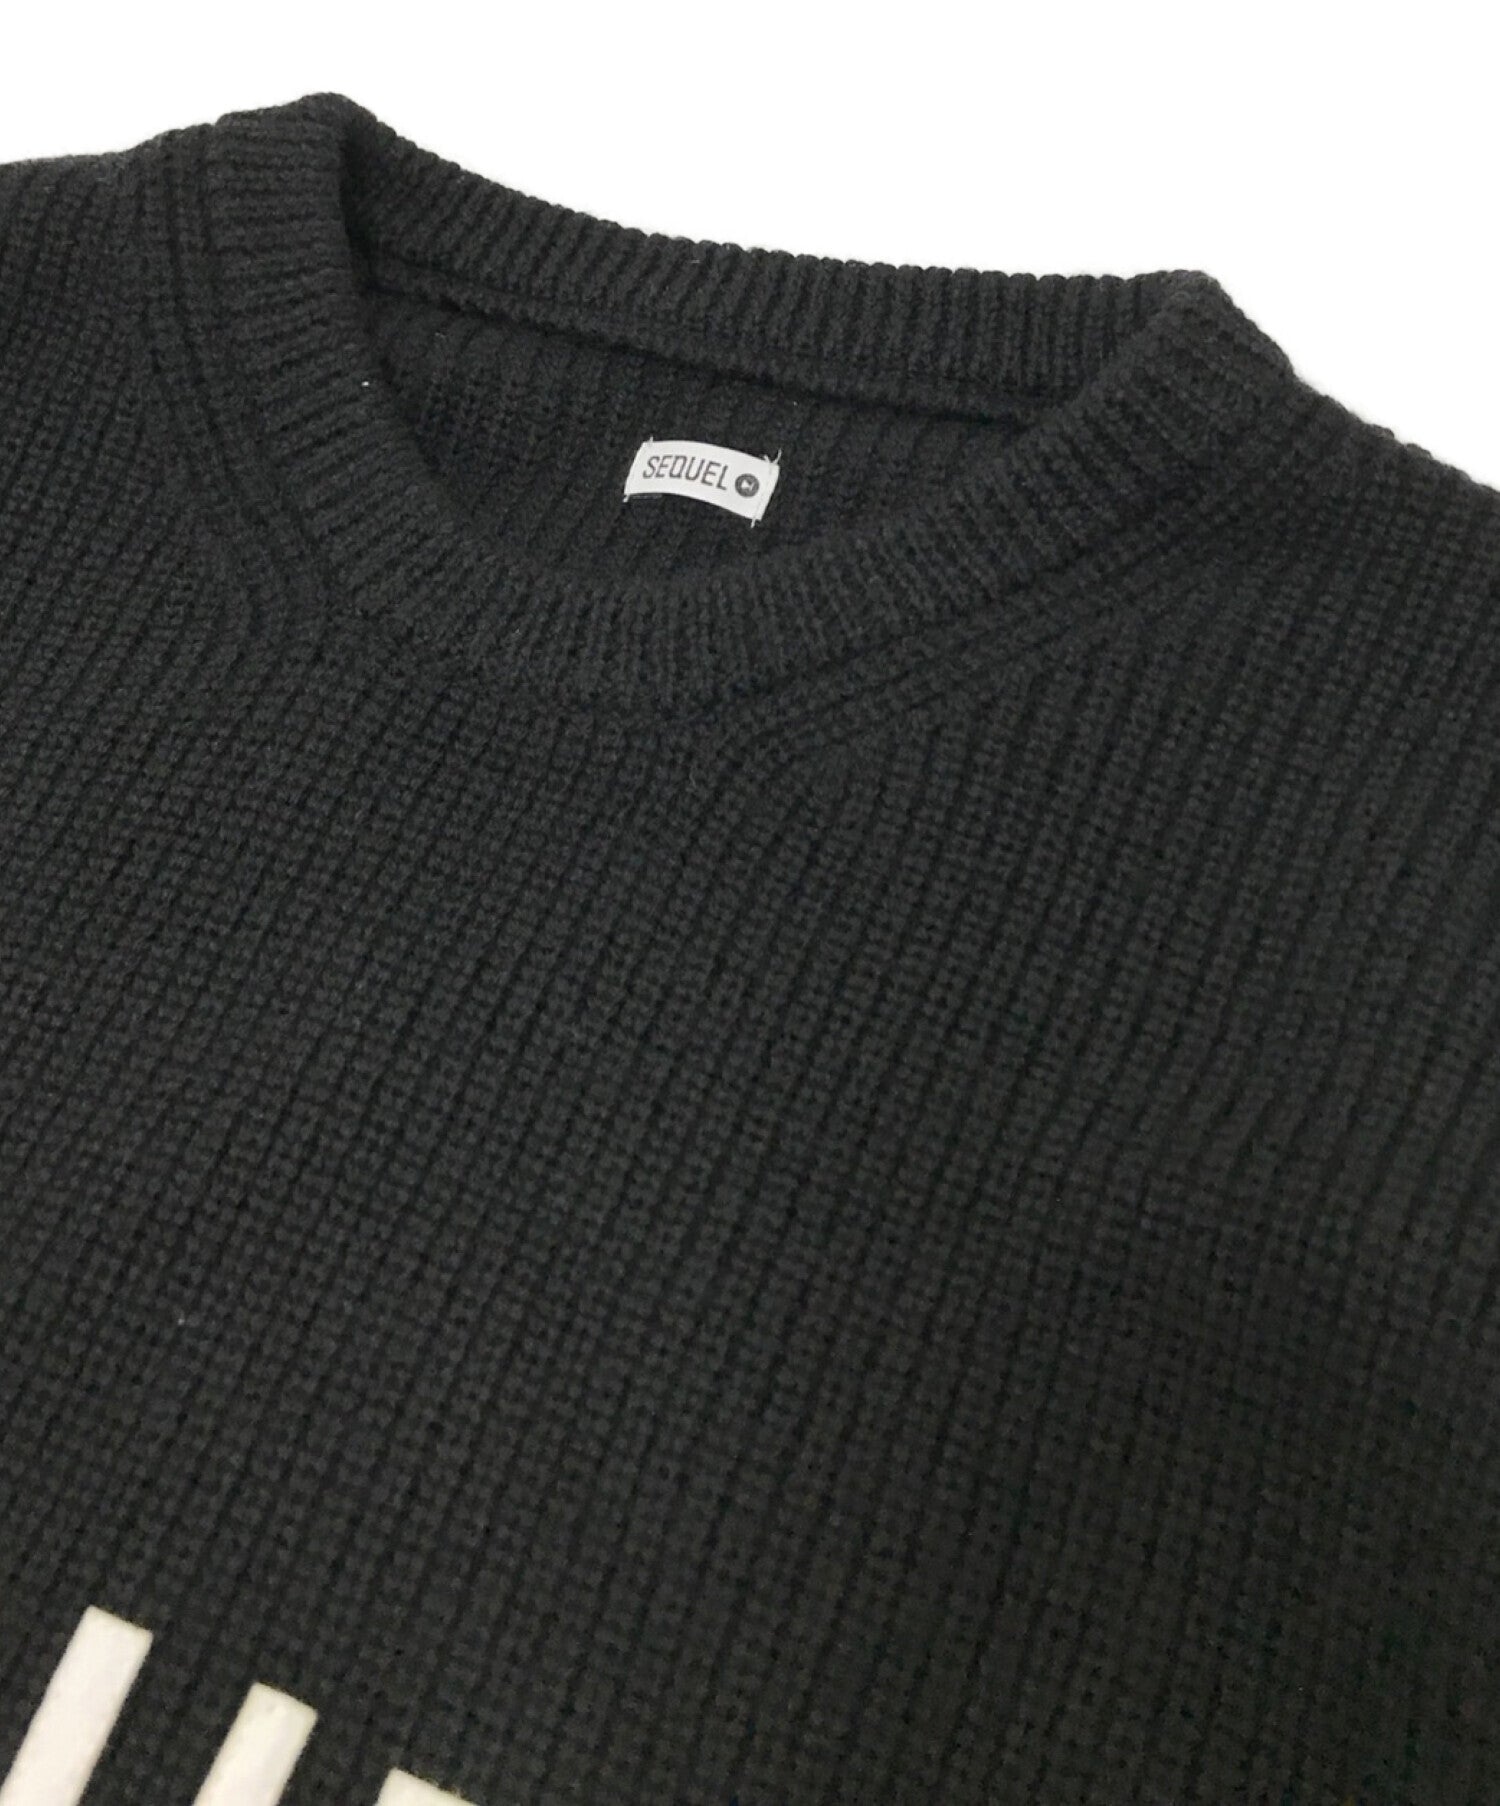 SEQUEL Crew neck knit, logo, popular, rare, sold out immediately